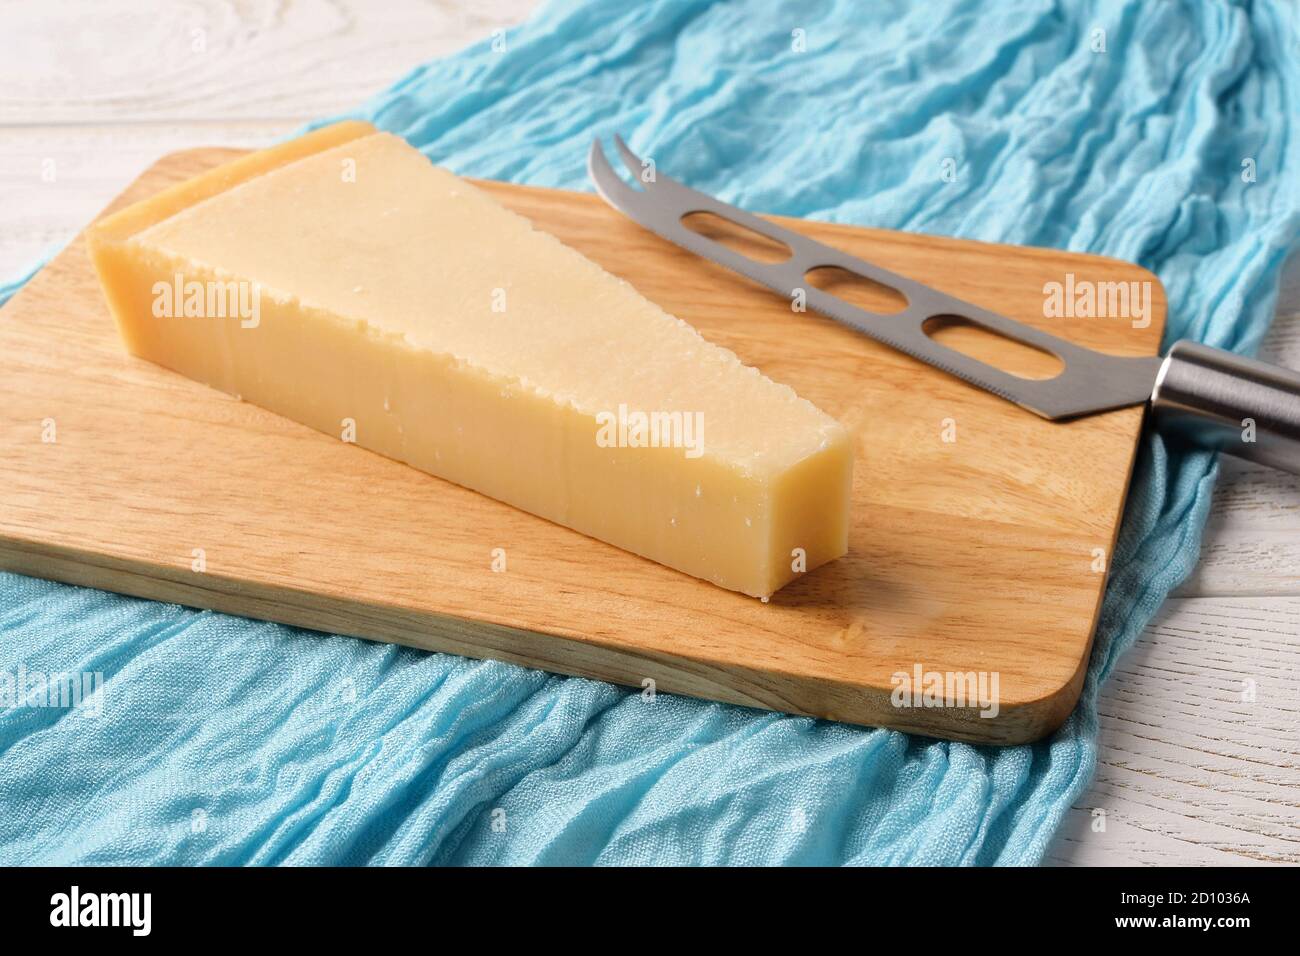 triangular wedge of traditional italian hard cheese grana padano or parmesan and cheese knife on a wood cutting boad over white wood table front view 2D1036A